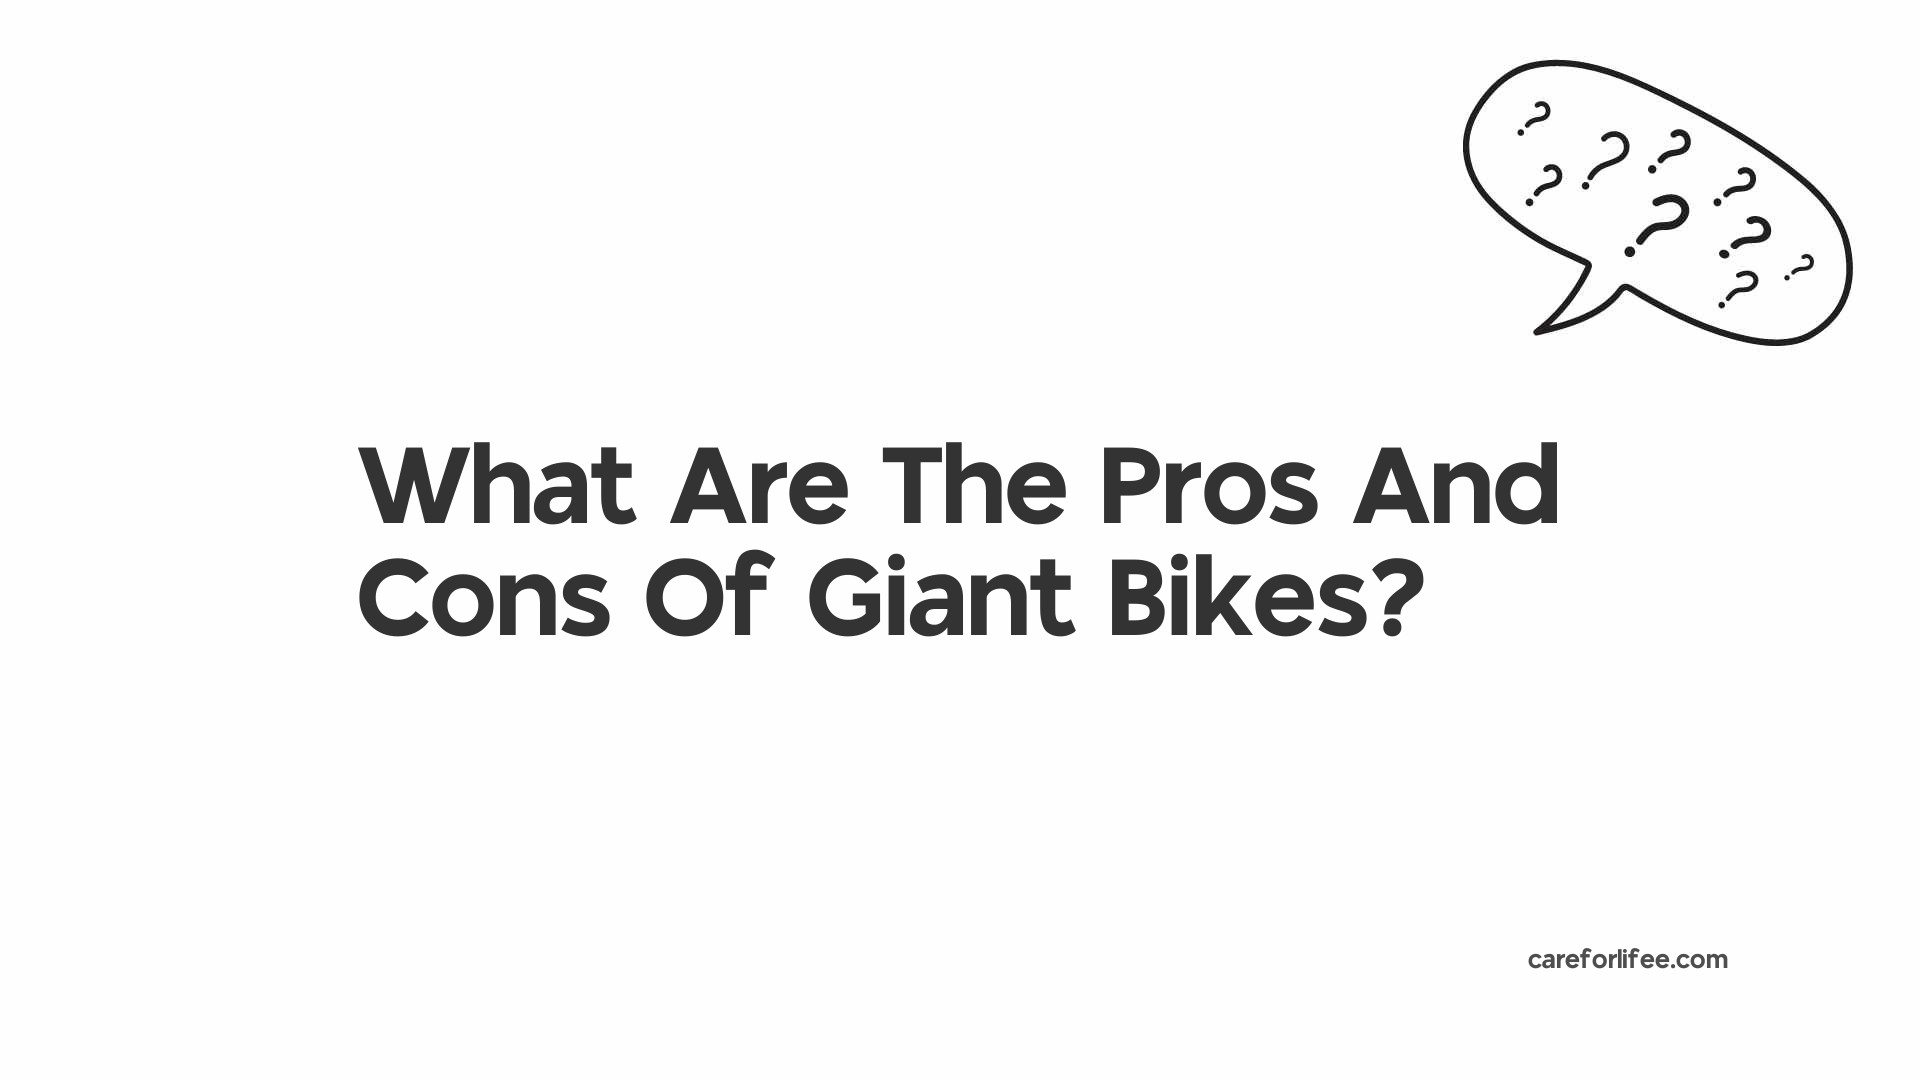 What Are The Pros And Cons Of Giant Bikes?